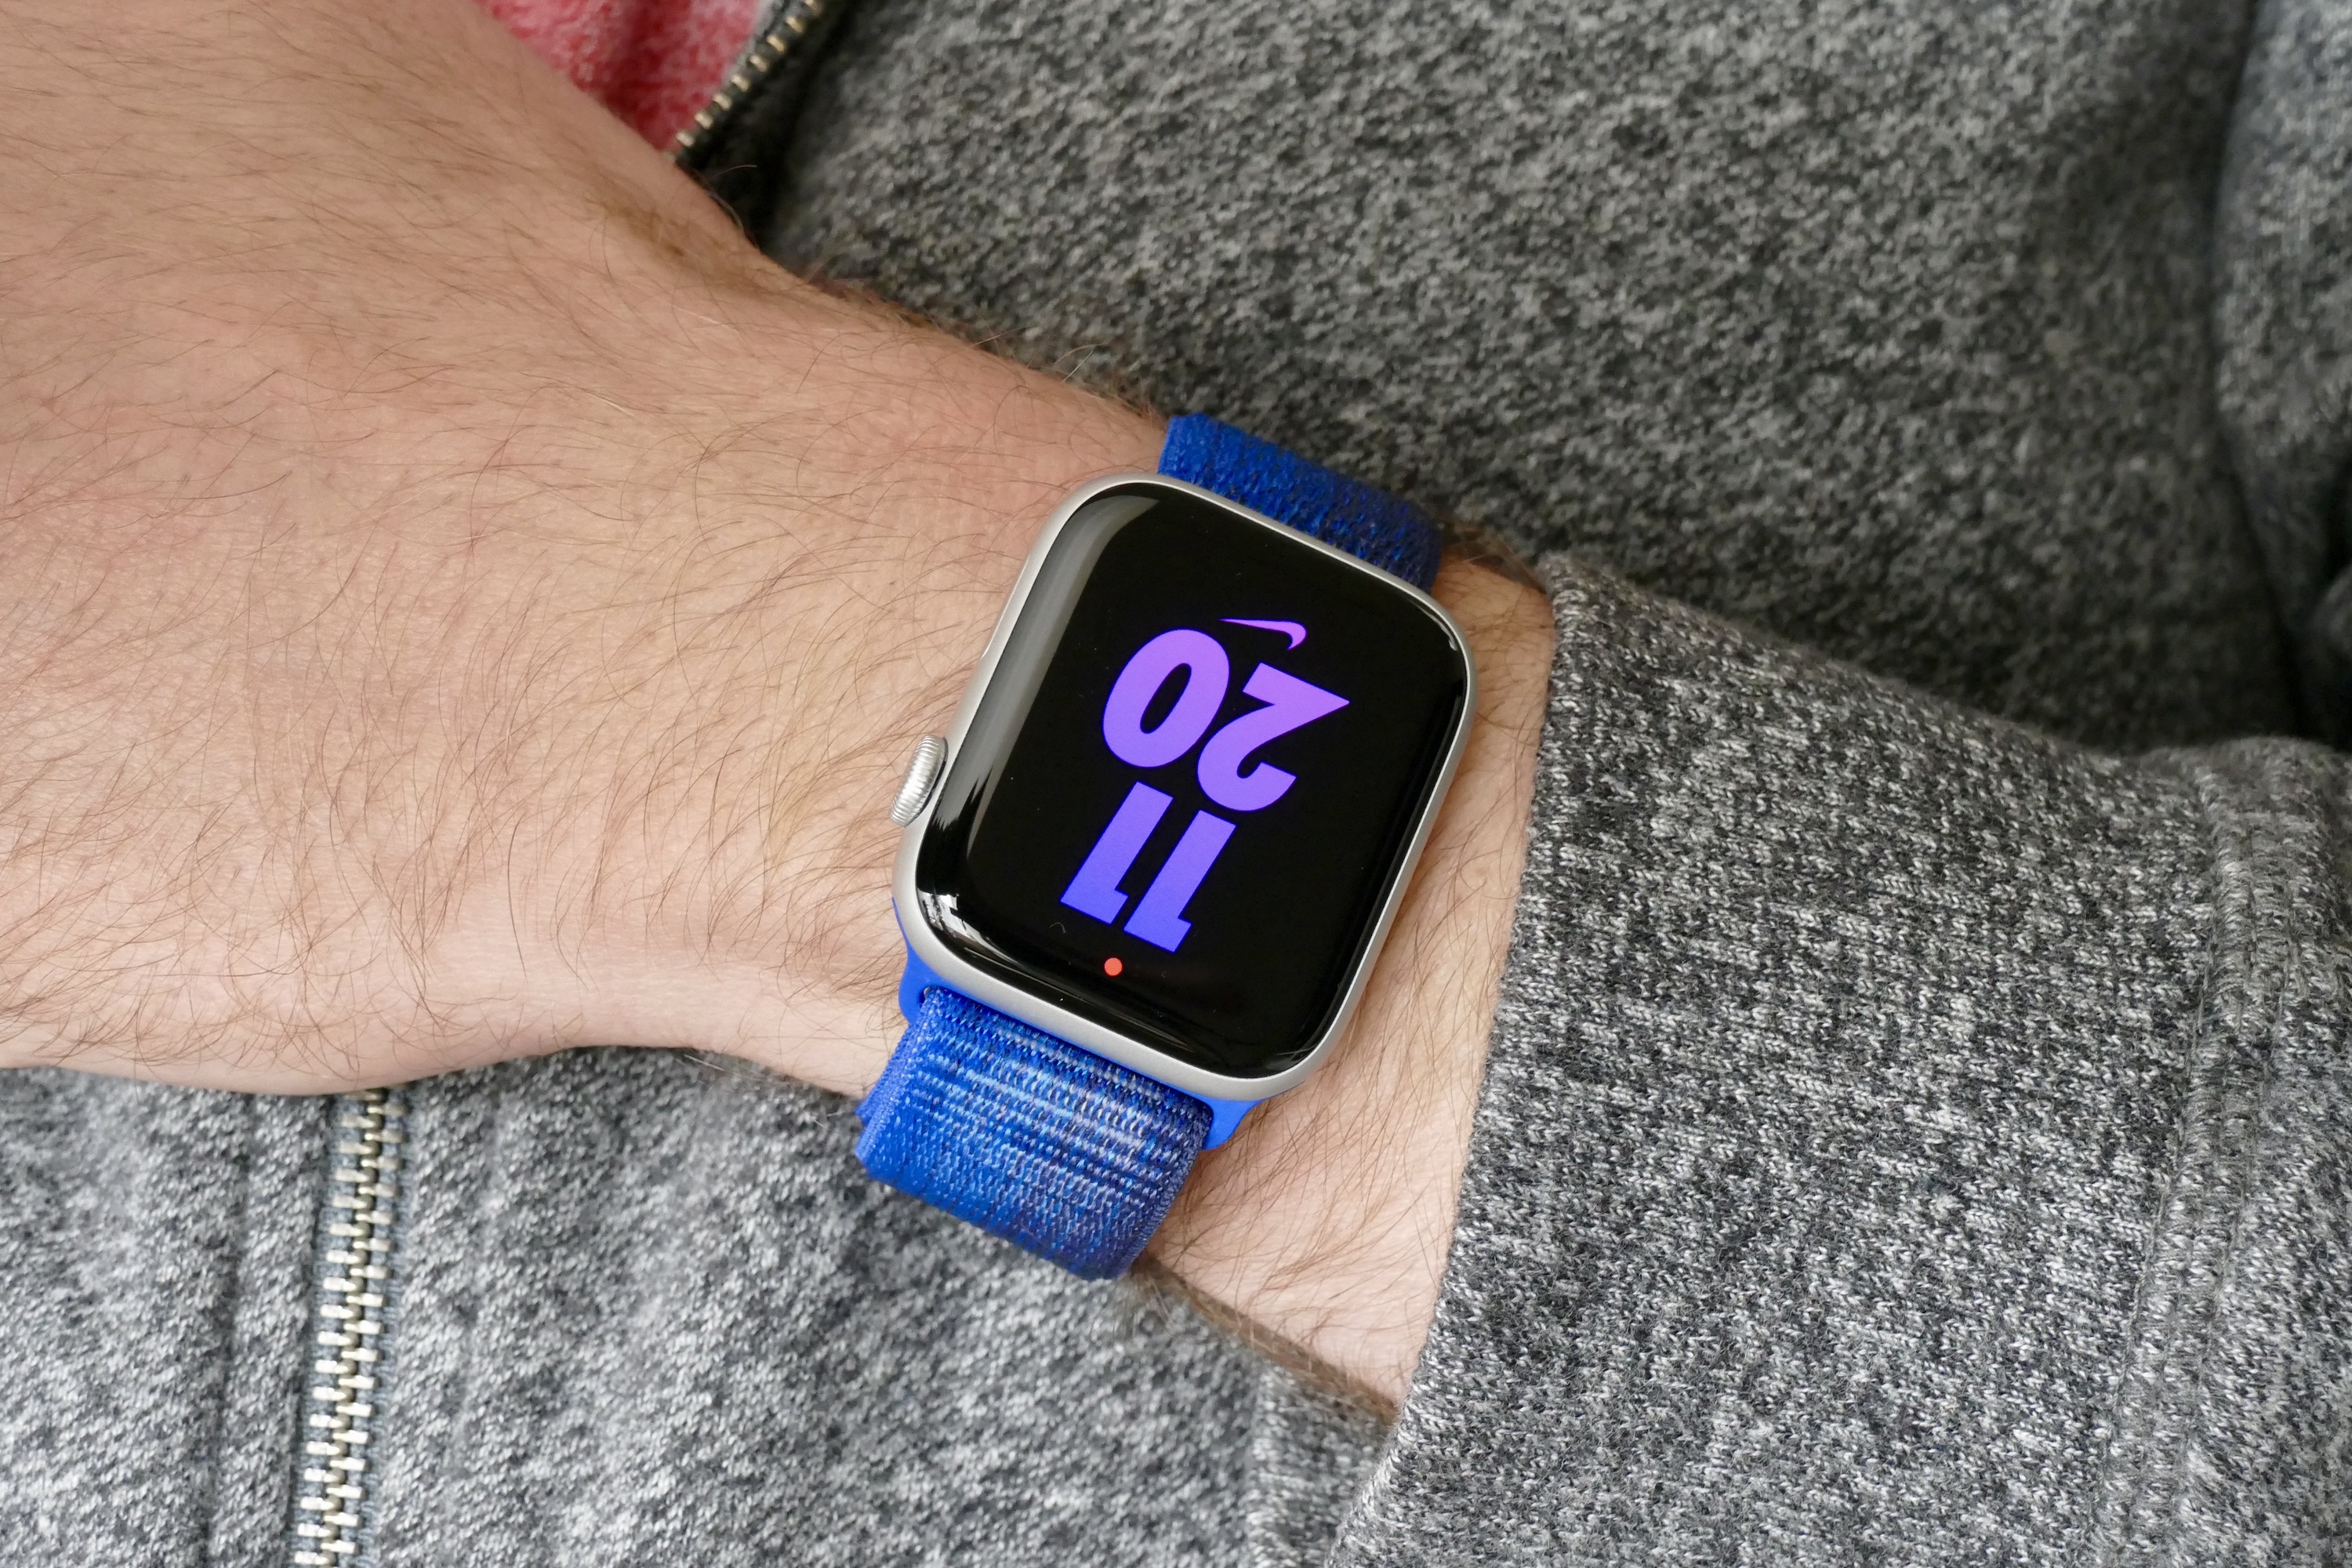 The Apple Watch SE 2 with Nike Bounce watch face.